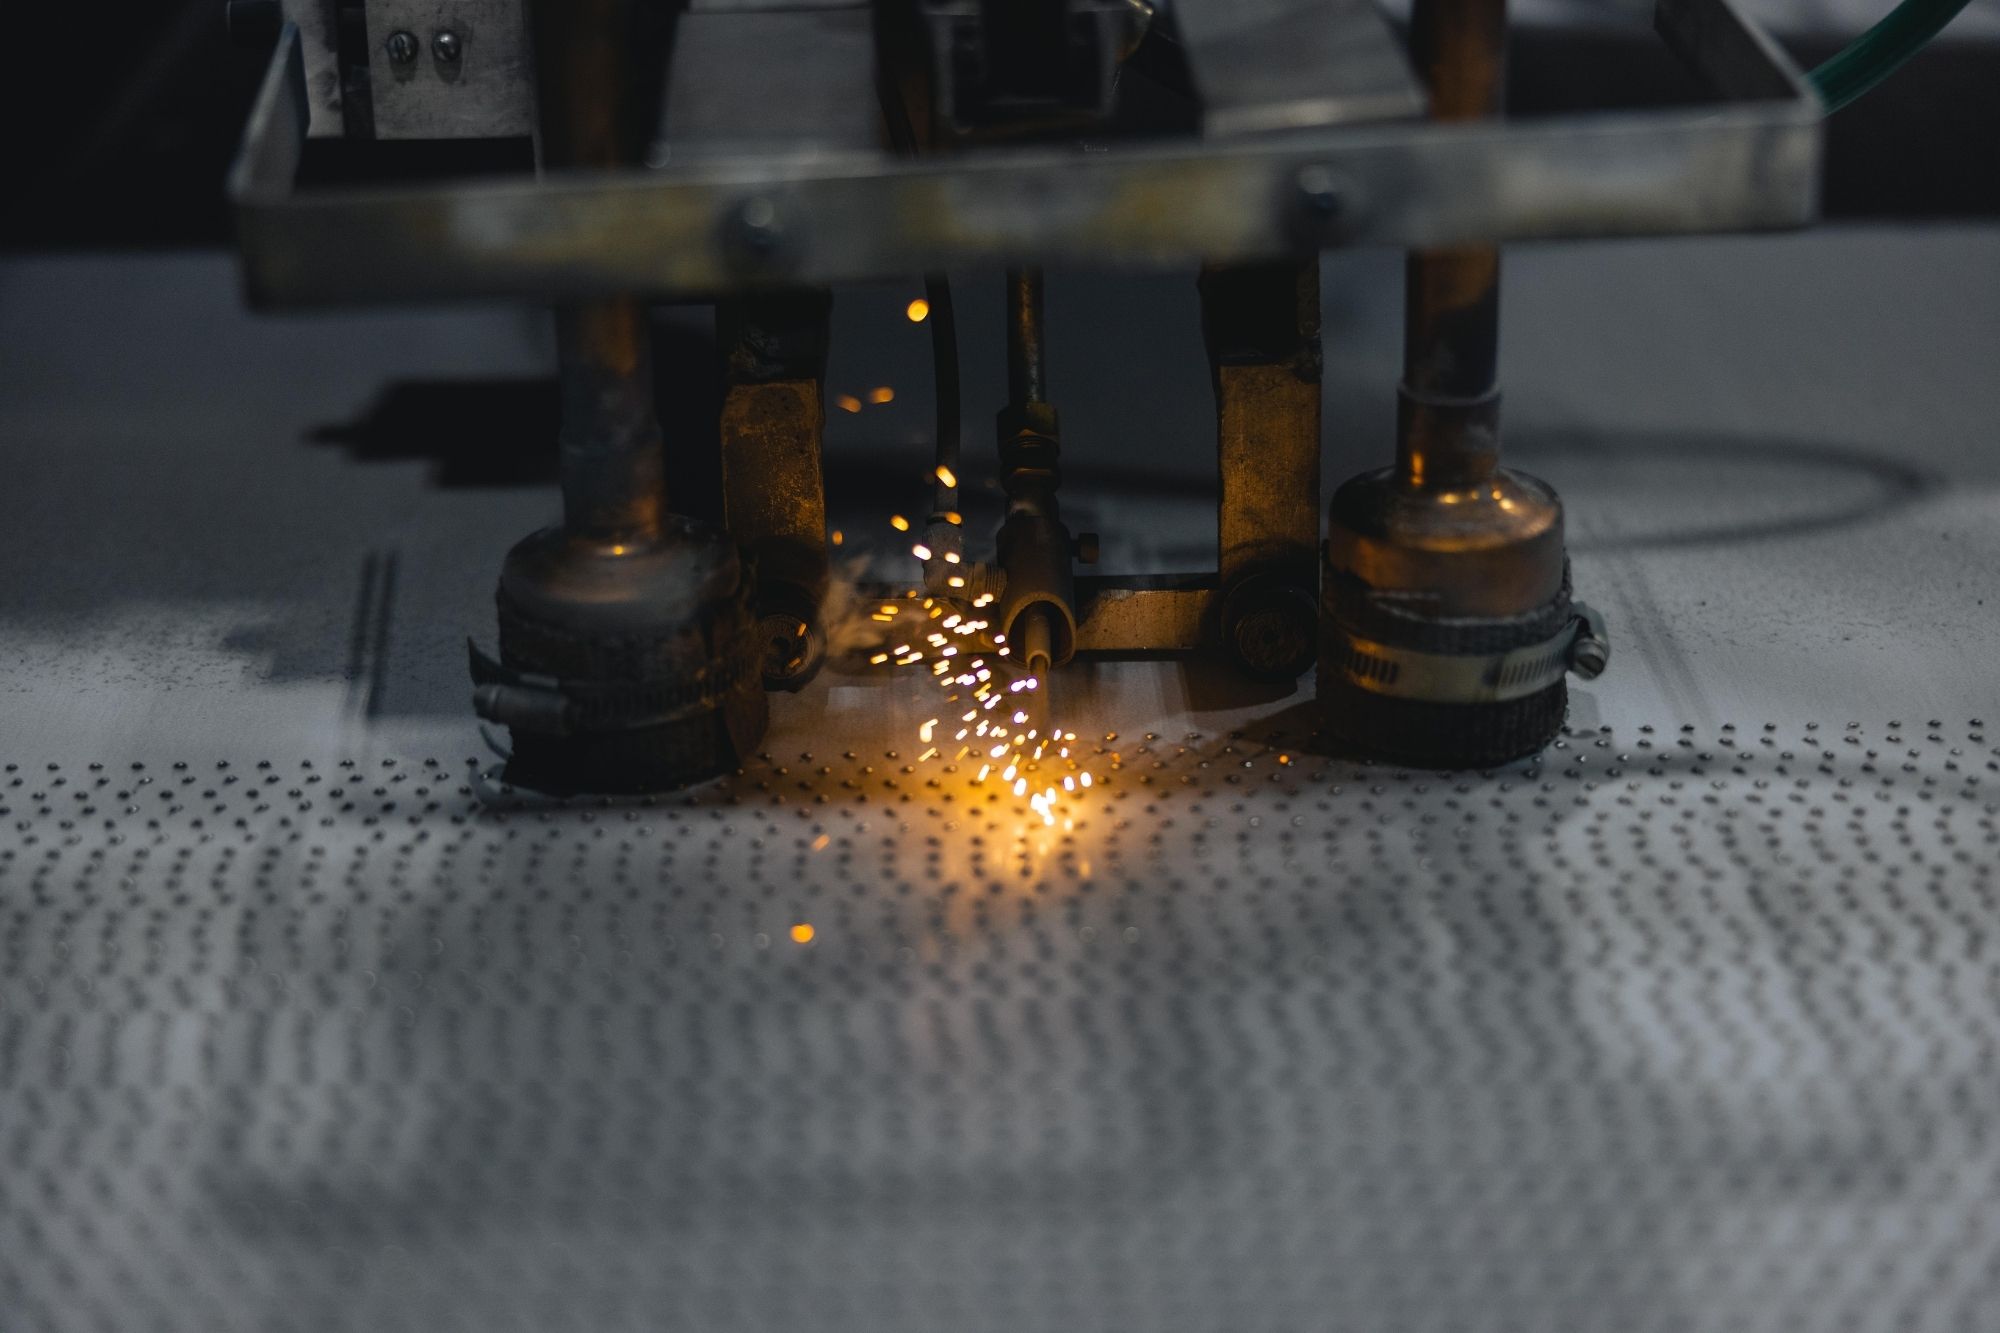 Machine welds traction features to base metal to create AlGrip traction safety flooring